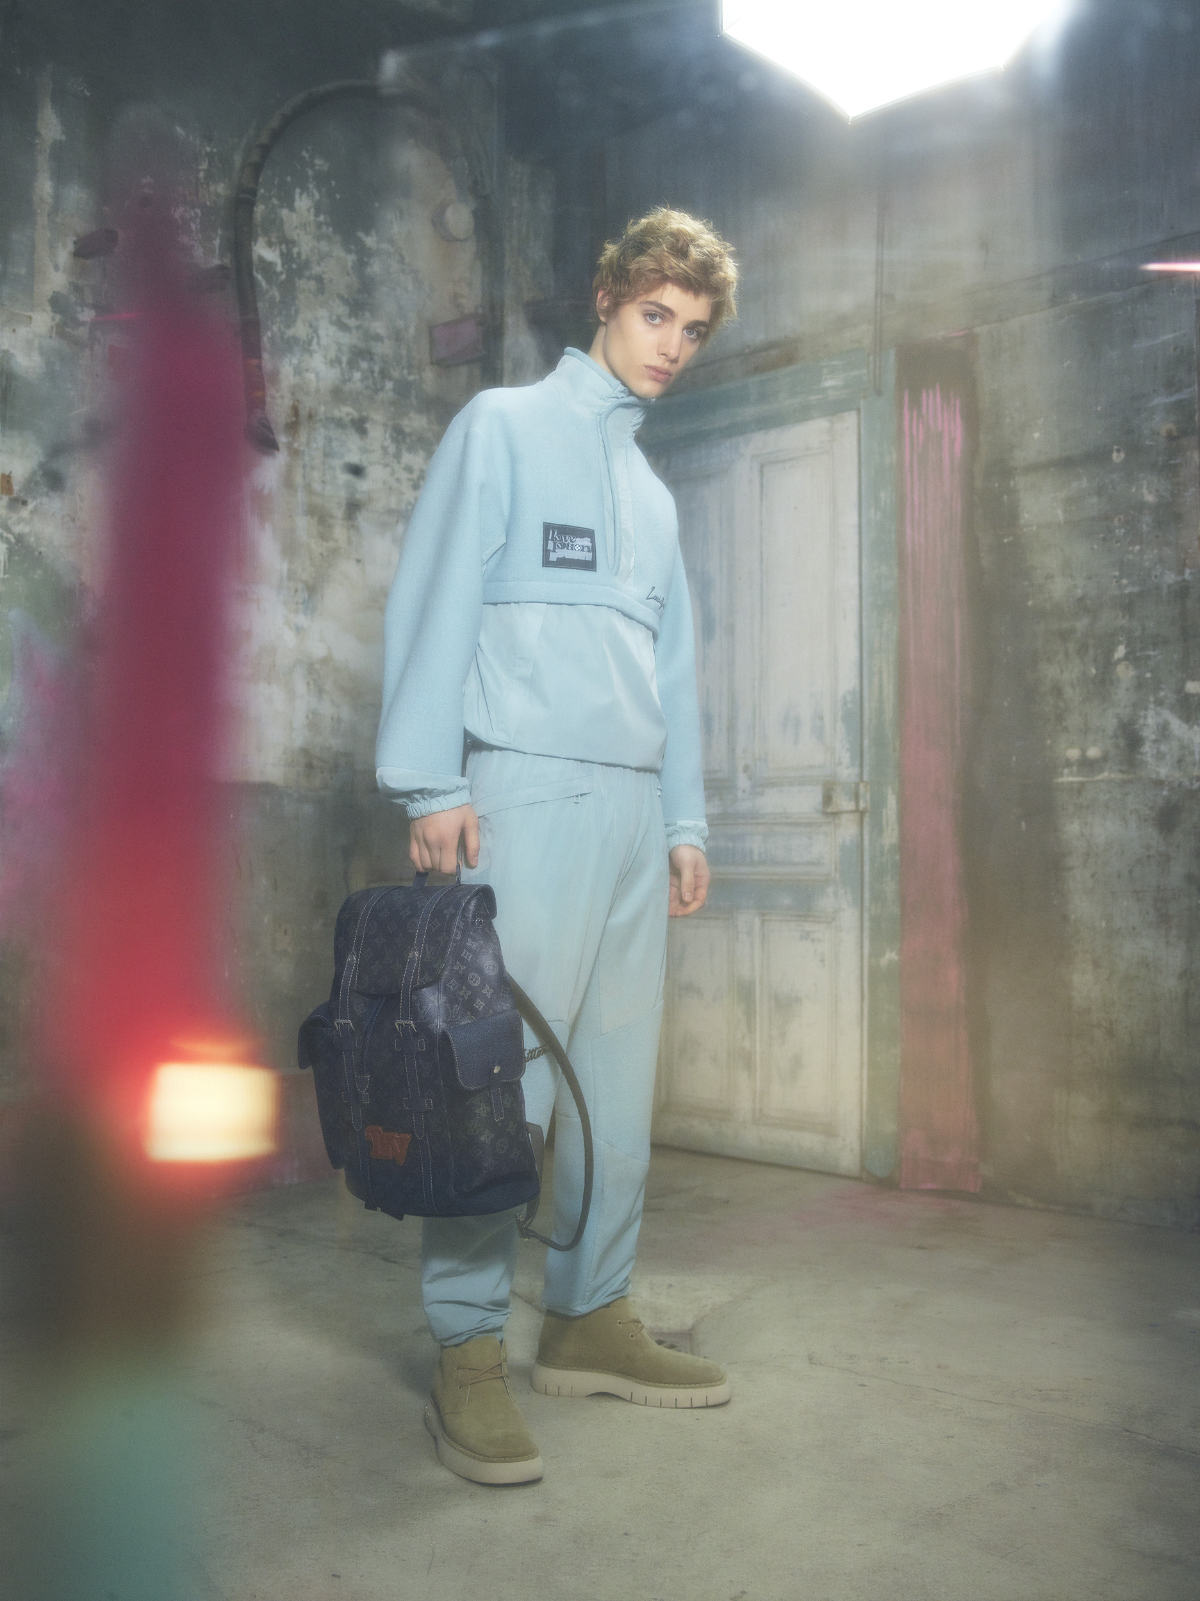 Louis Vuitton announces new additions in Taurillon Monogram and